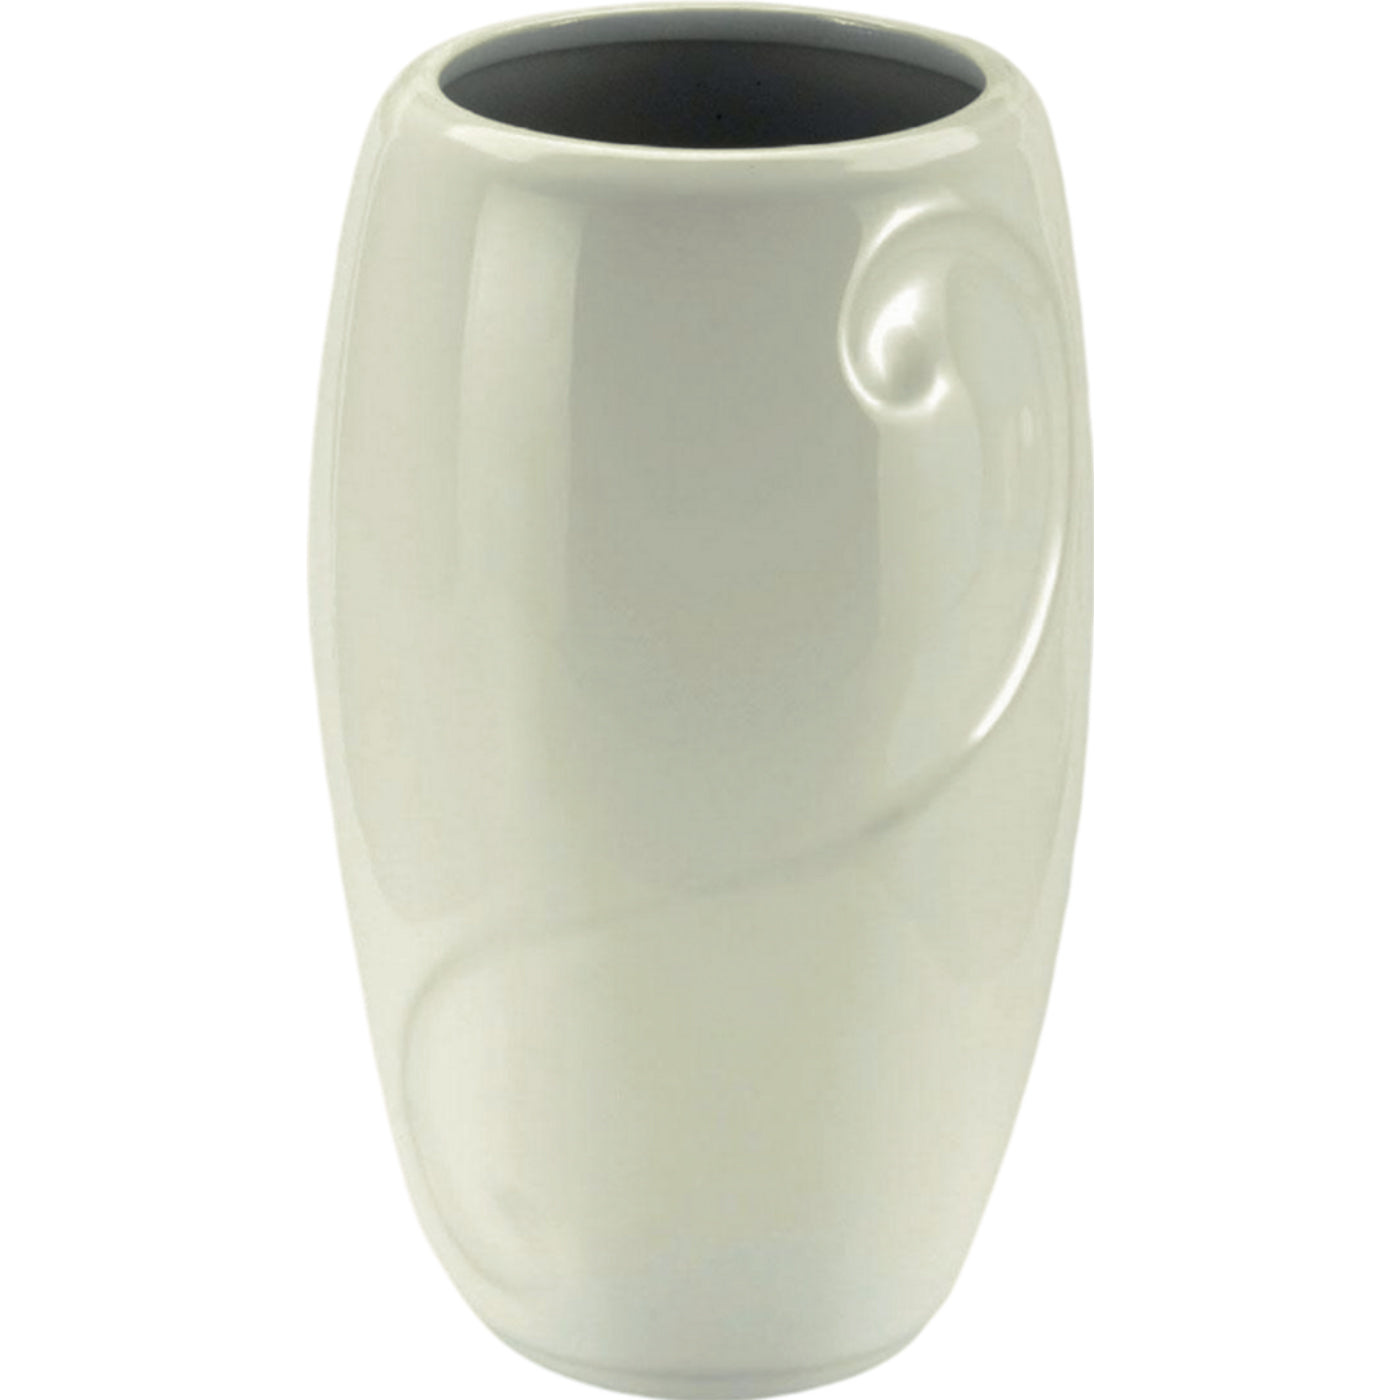 Grave vase Sharon ivory 21x13cm - 8.3x5.1in In ivory porcelain, wall attached SH124P/A